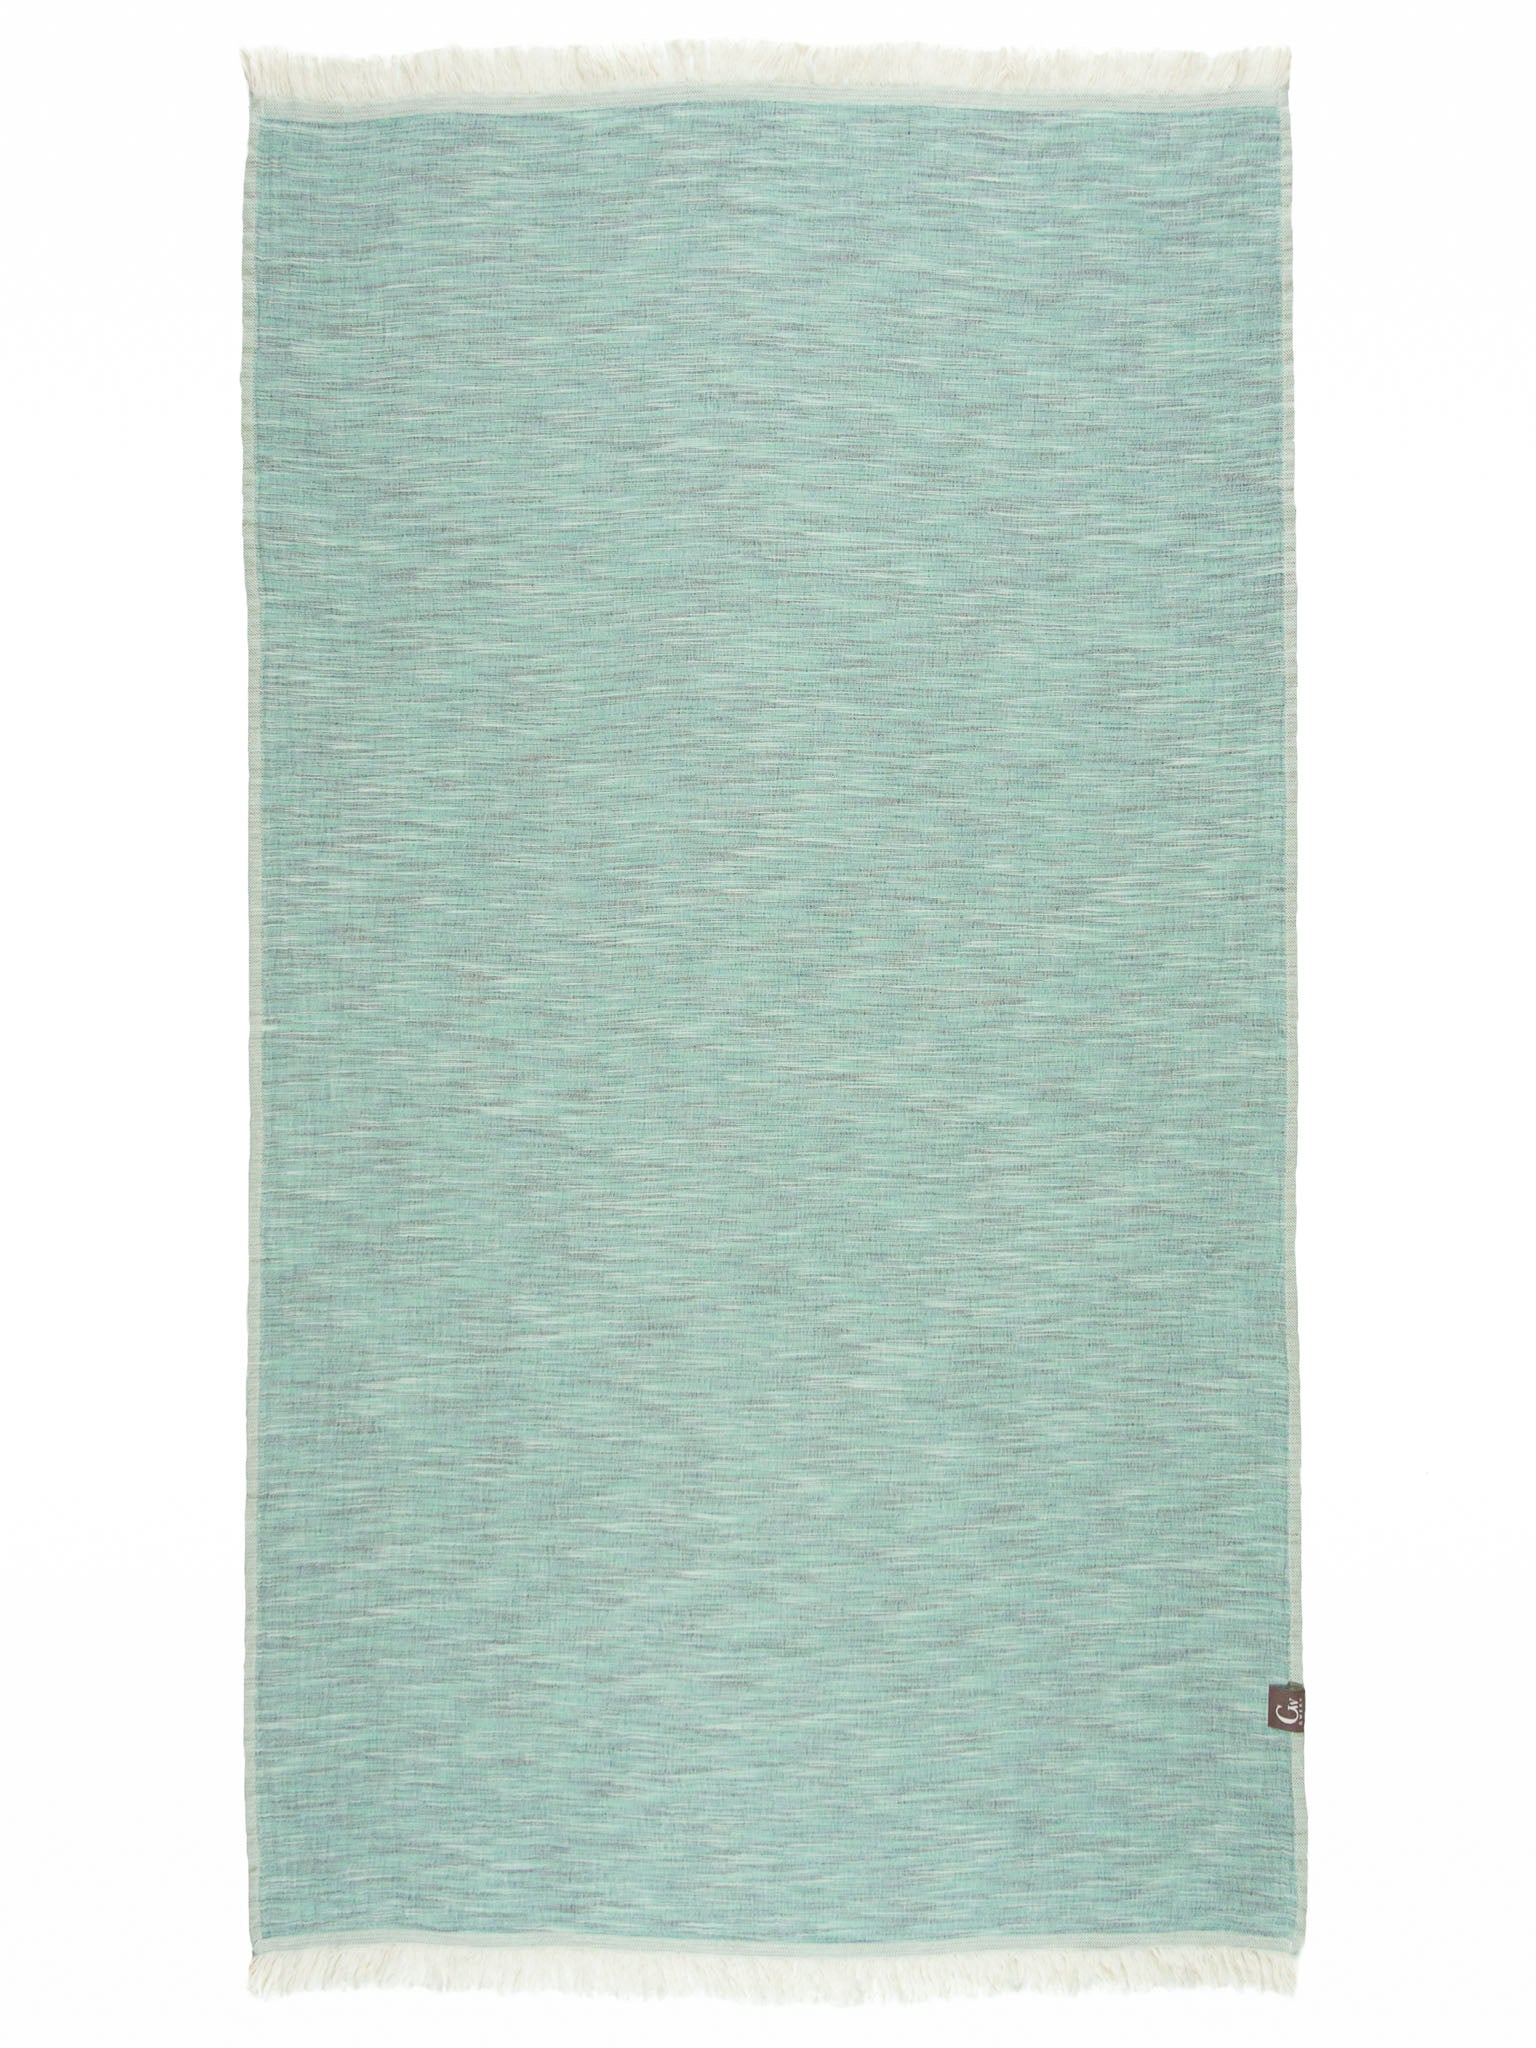 Green patterned, double sided, beach towel open up